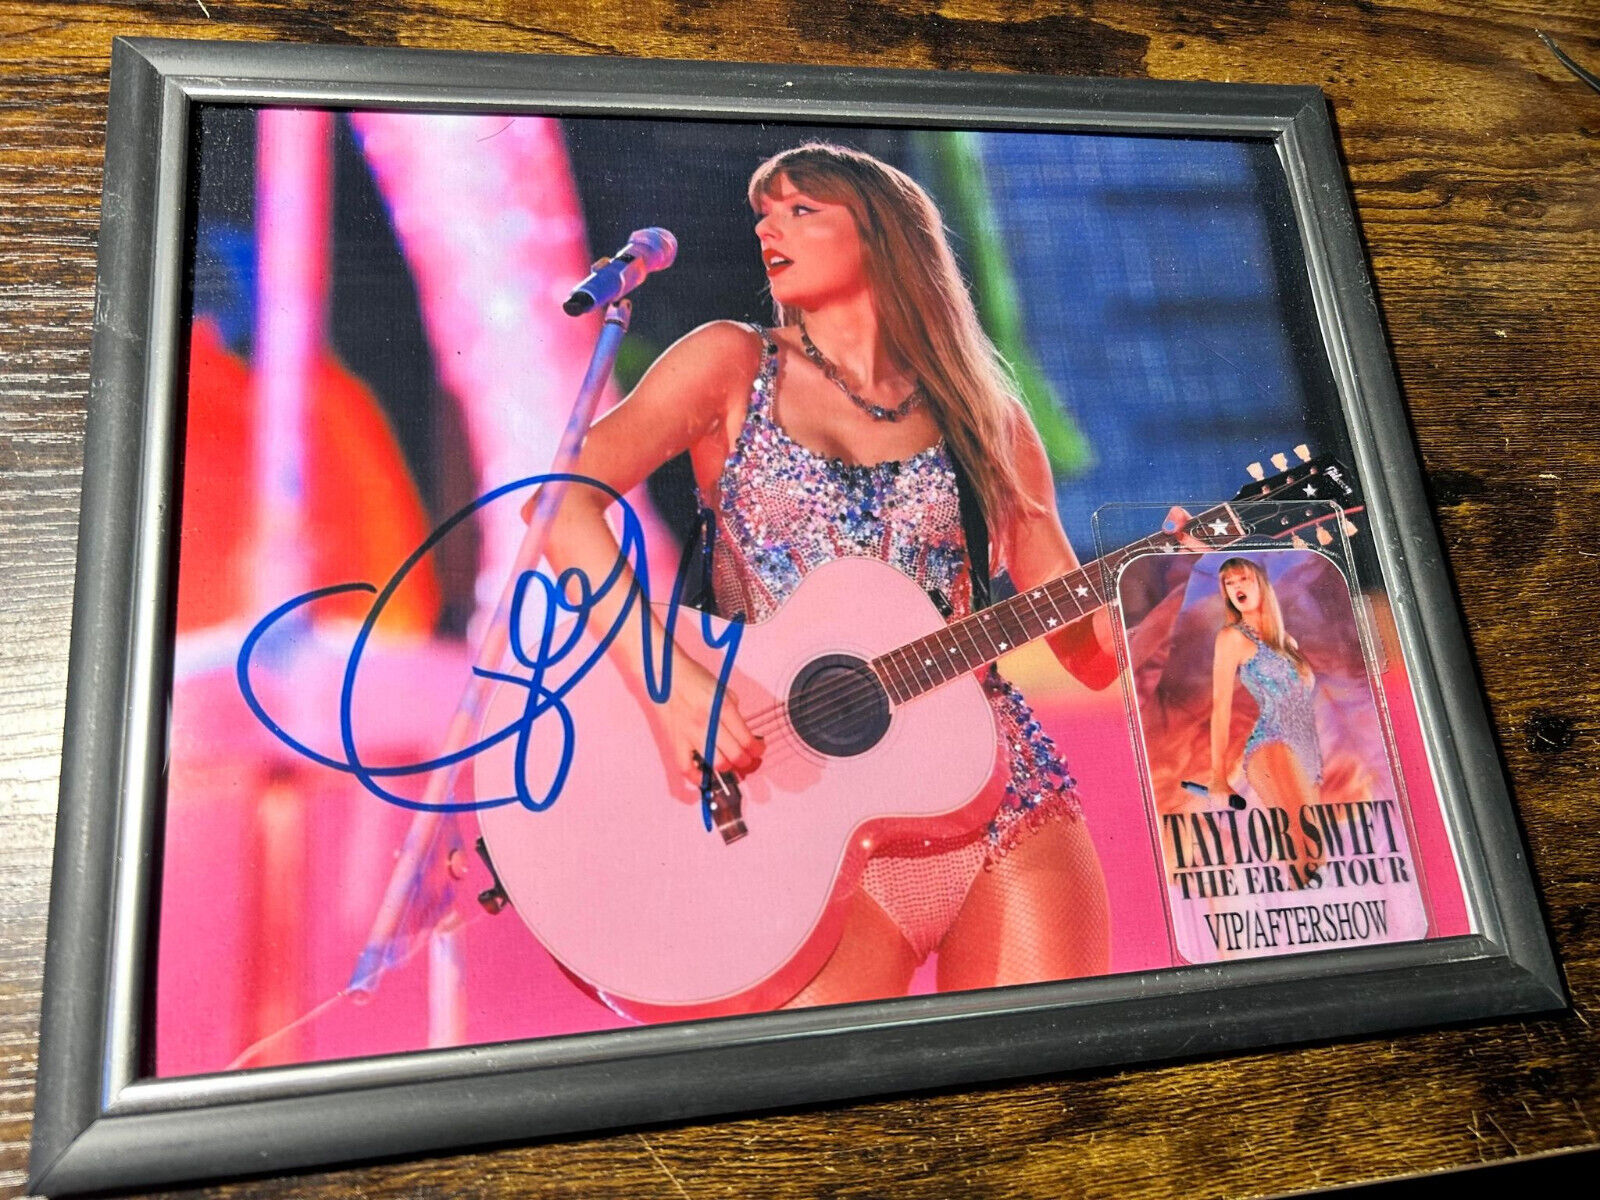 Taylor Swift signed  Framed Reprint photo And VIP Aftershow Laminate Pass